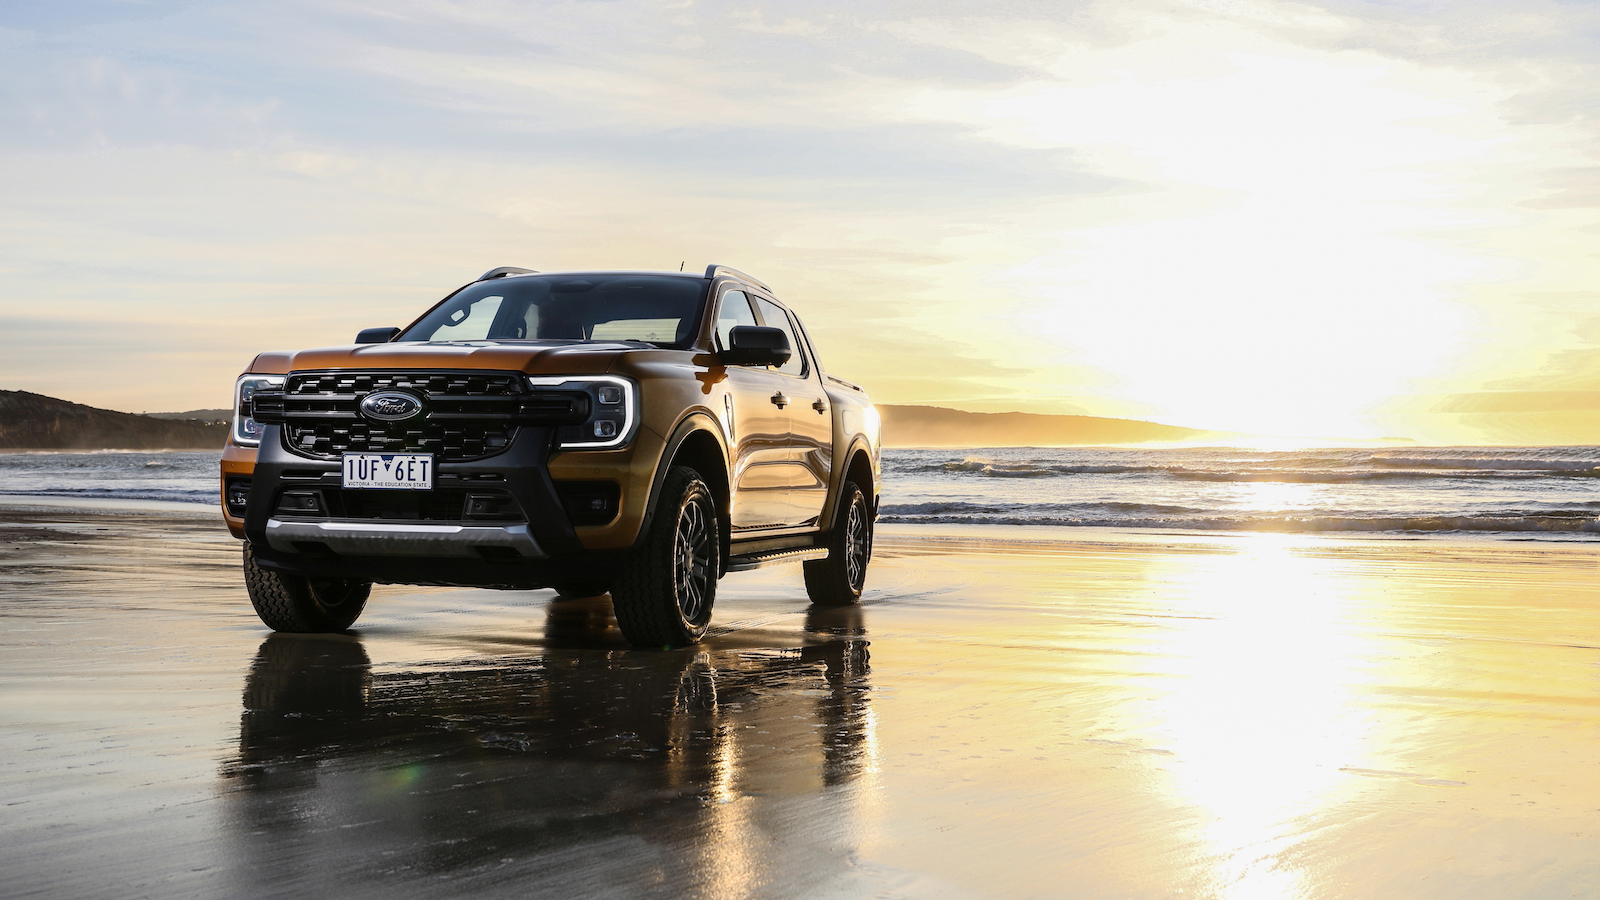 Ford Ranger Review: This Could End Toyota’s Ute Dominance